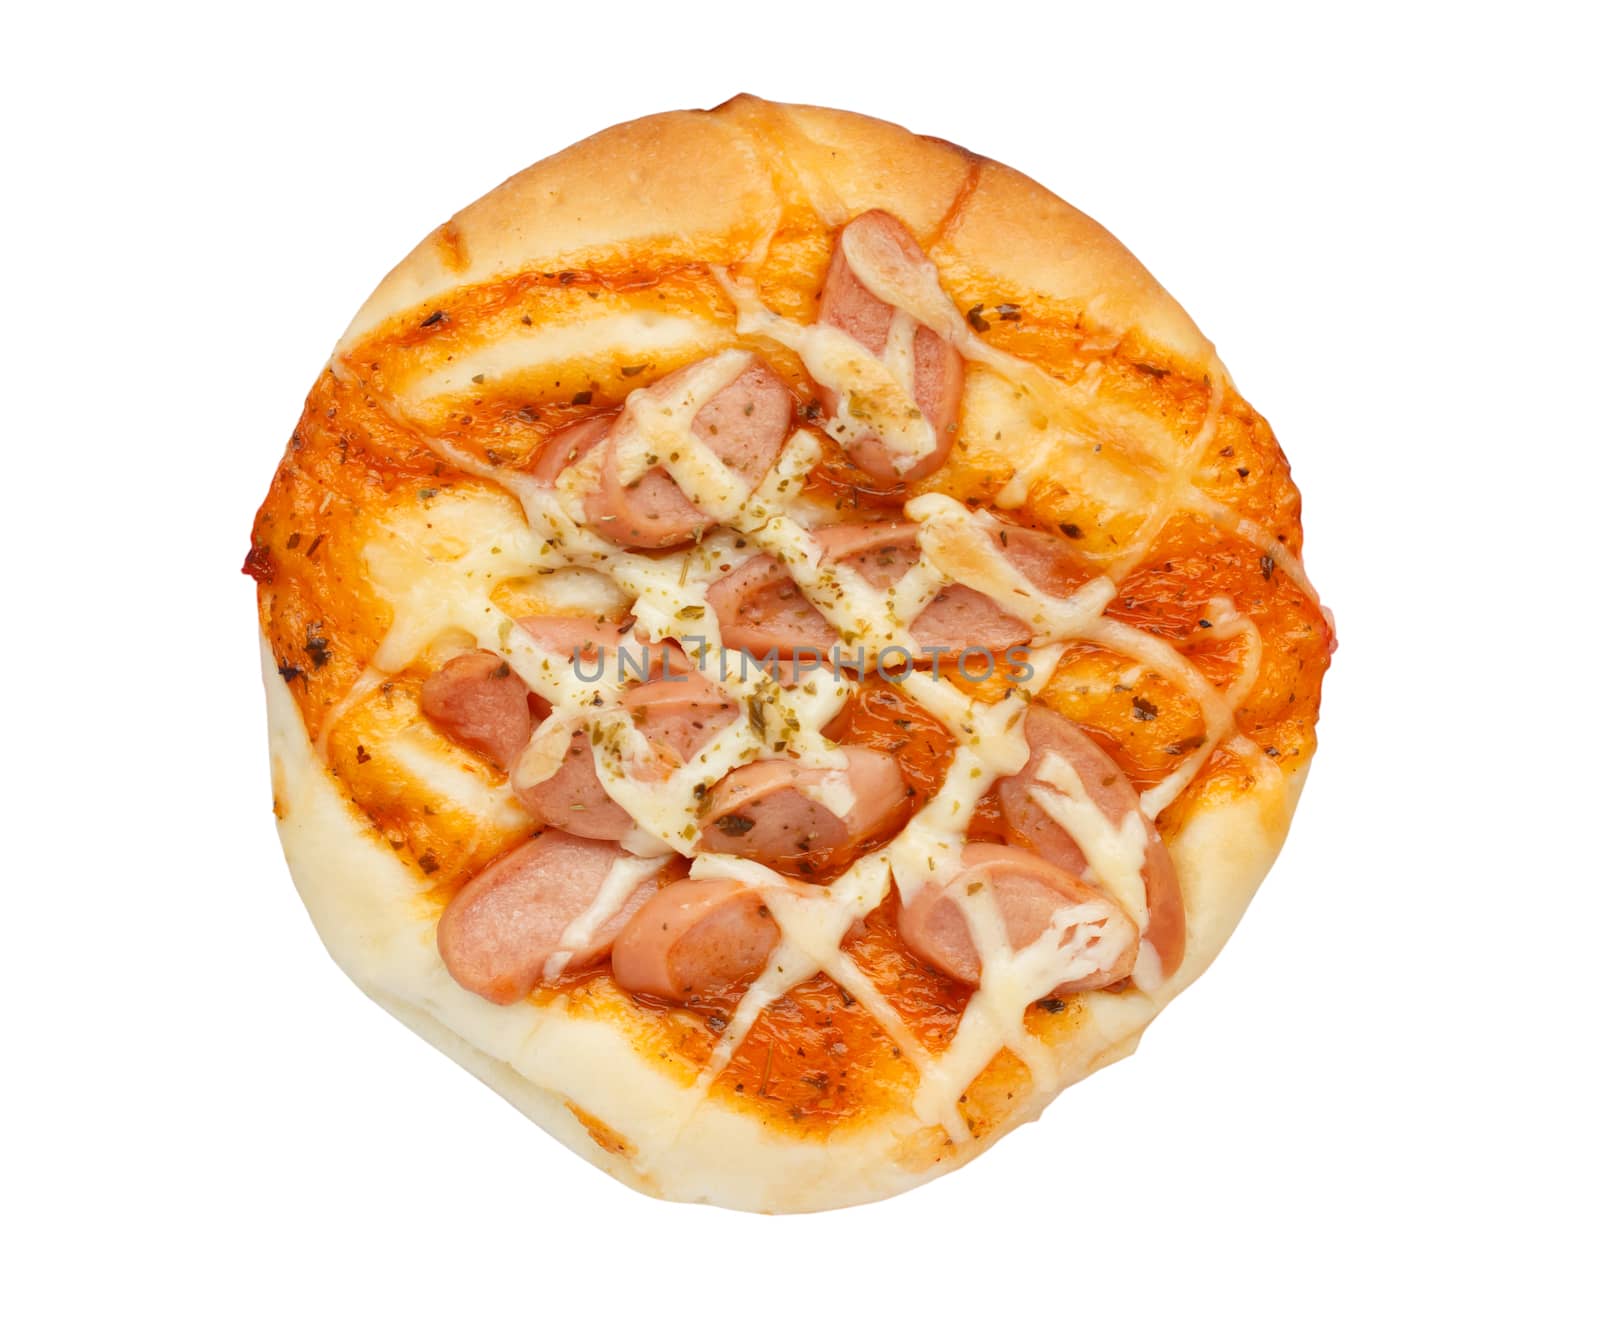 sausage pizza bread by vitawin